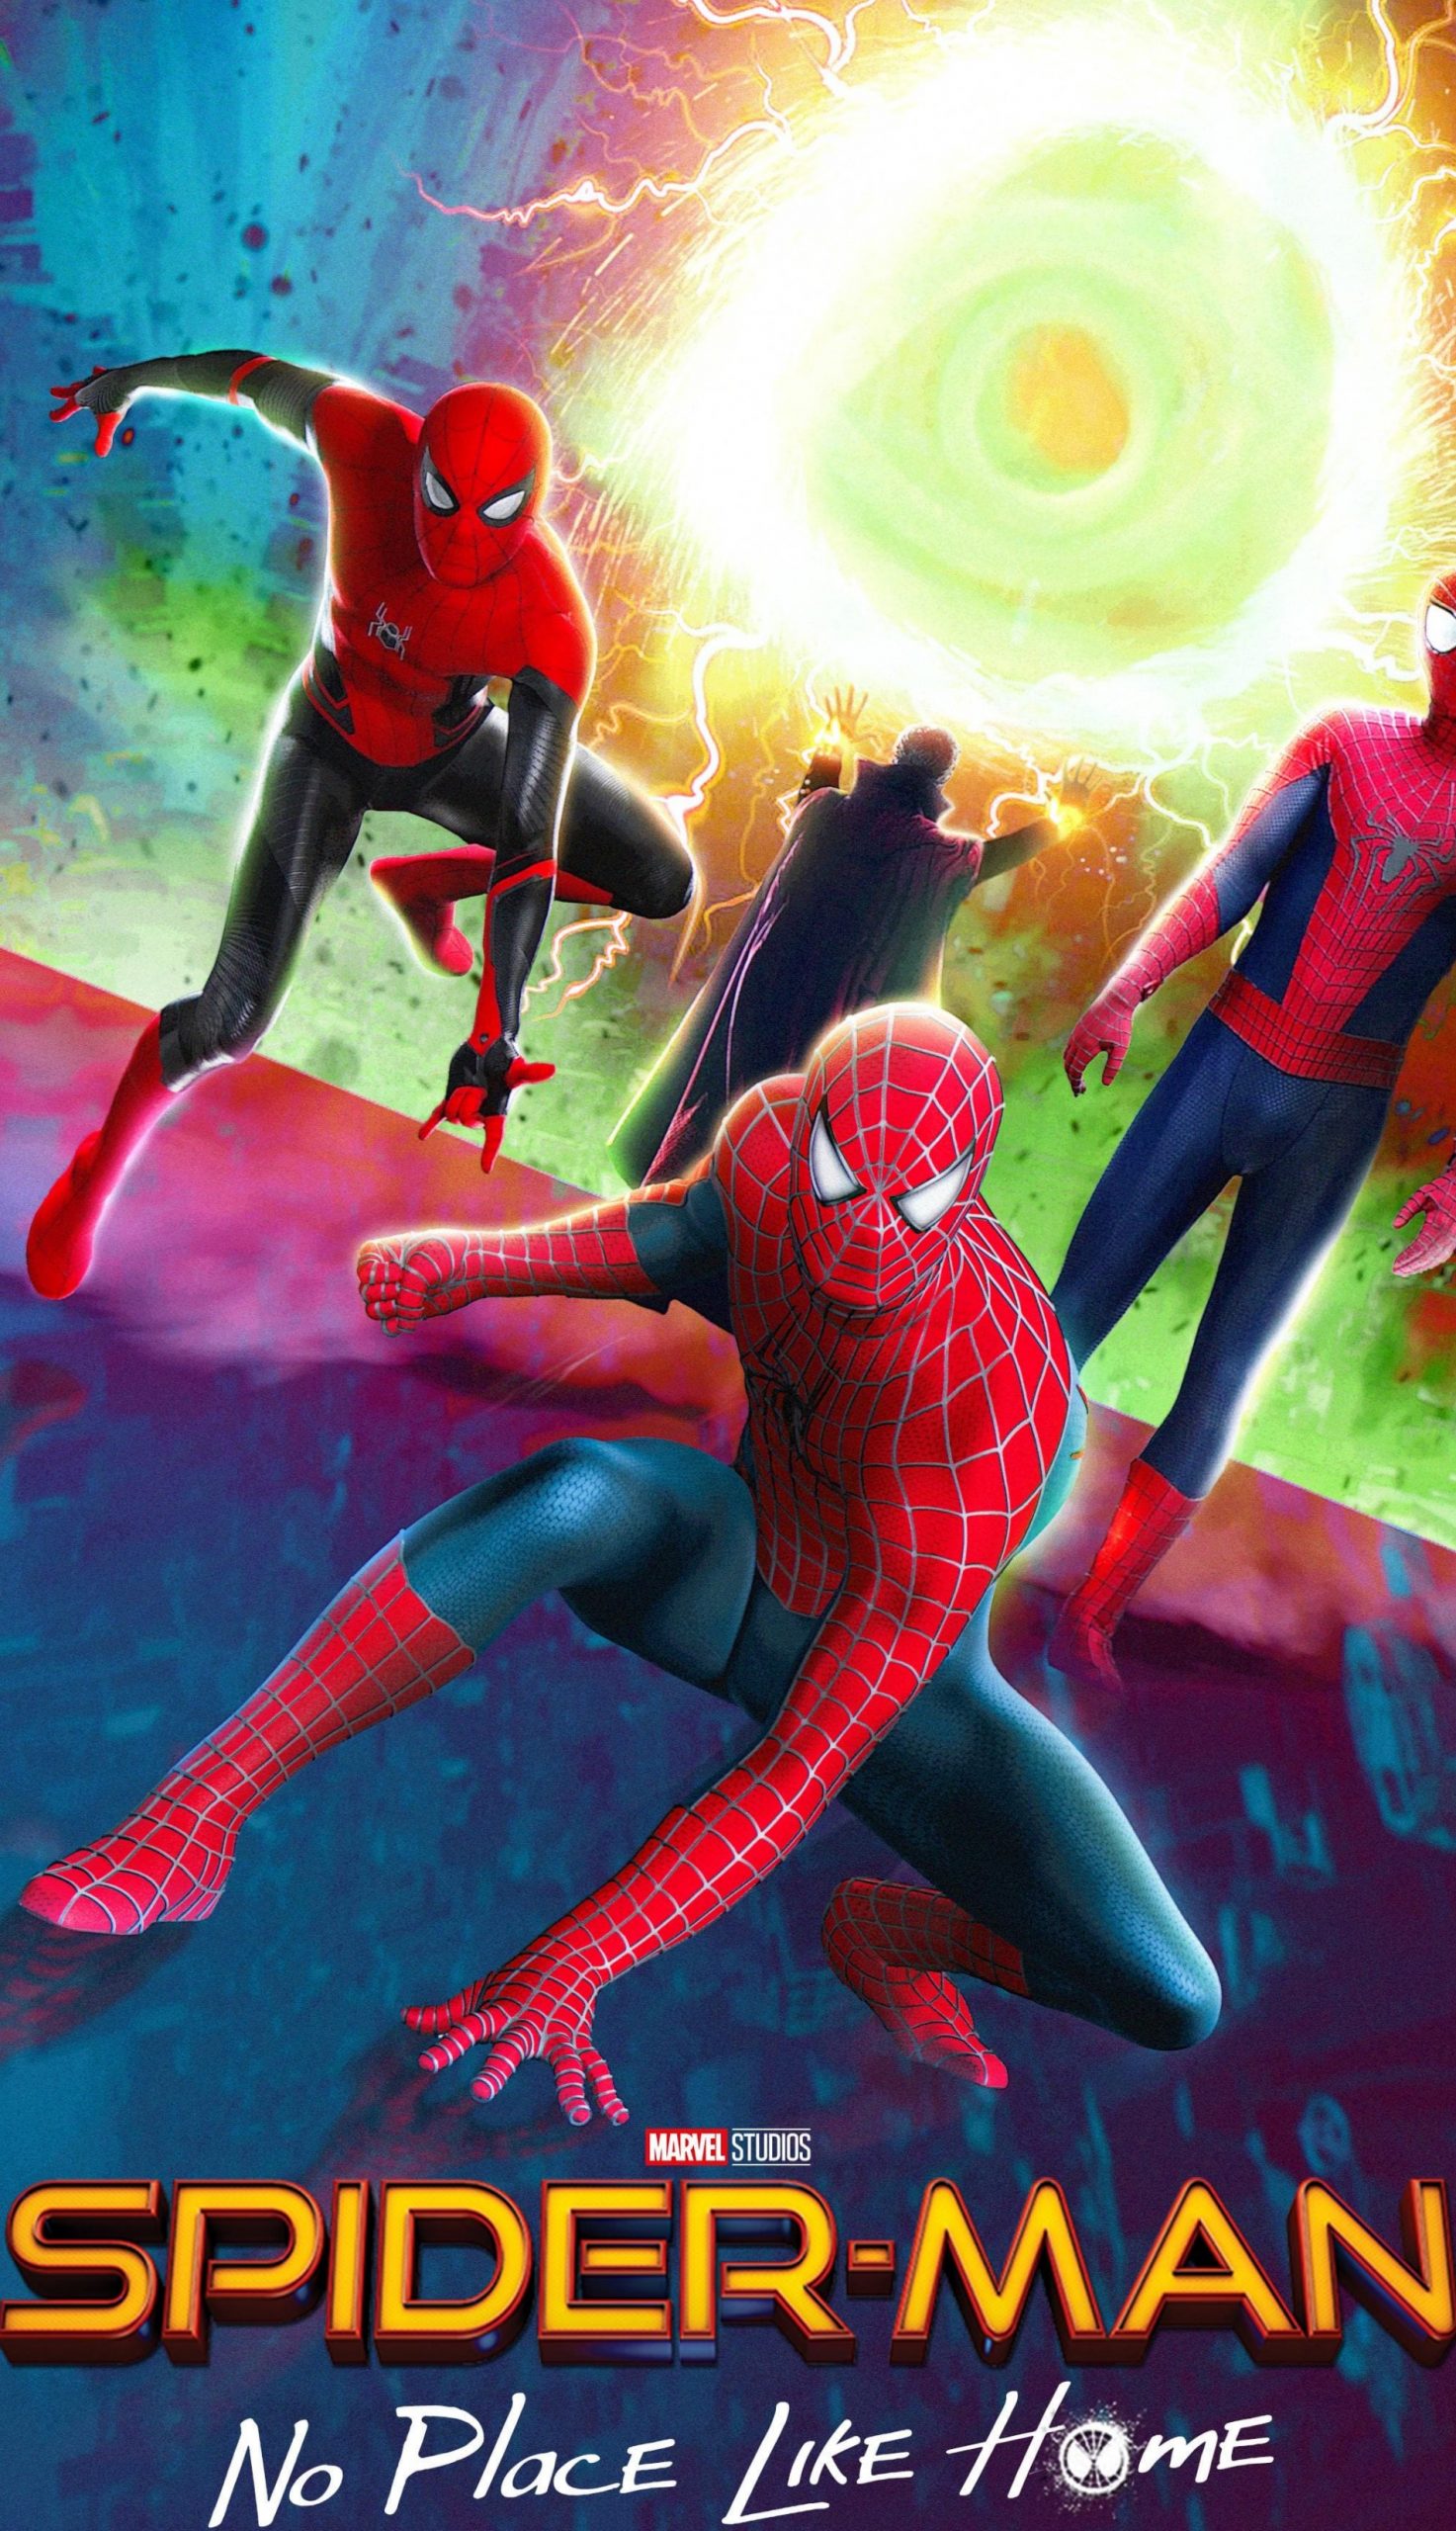 Spider-Man: No Way Home download the new version for ios